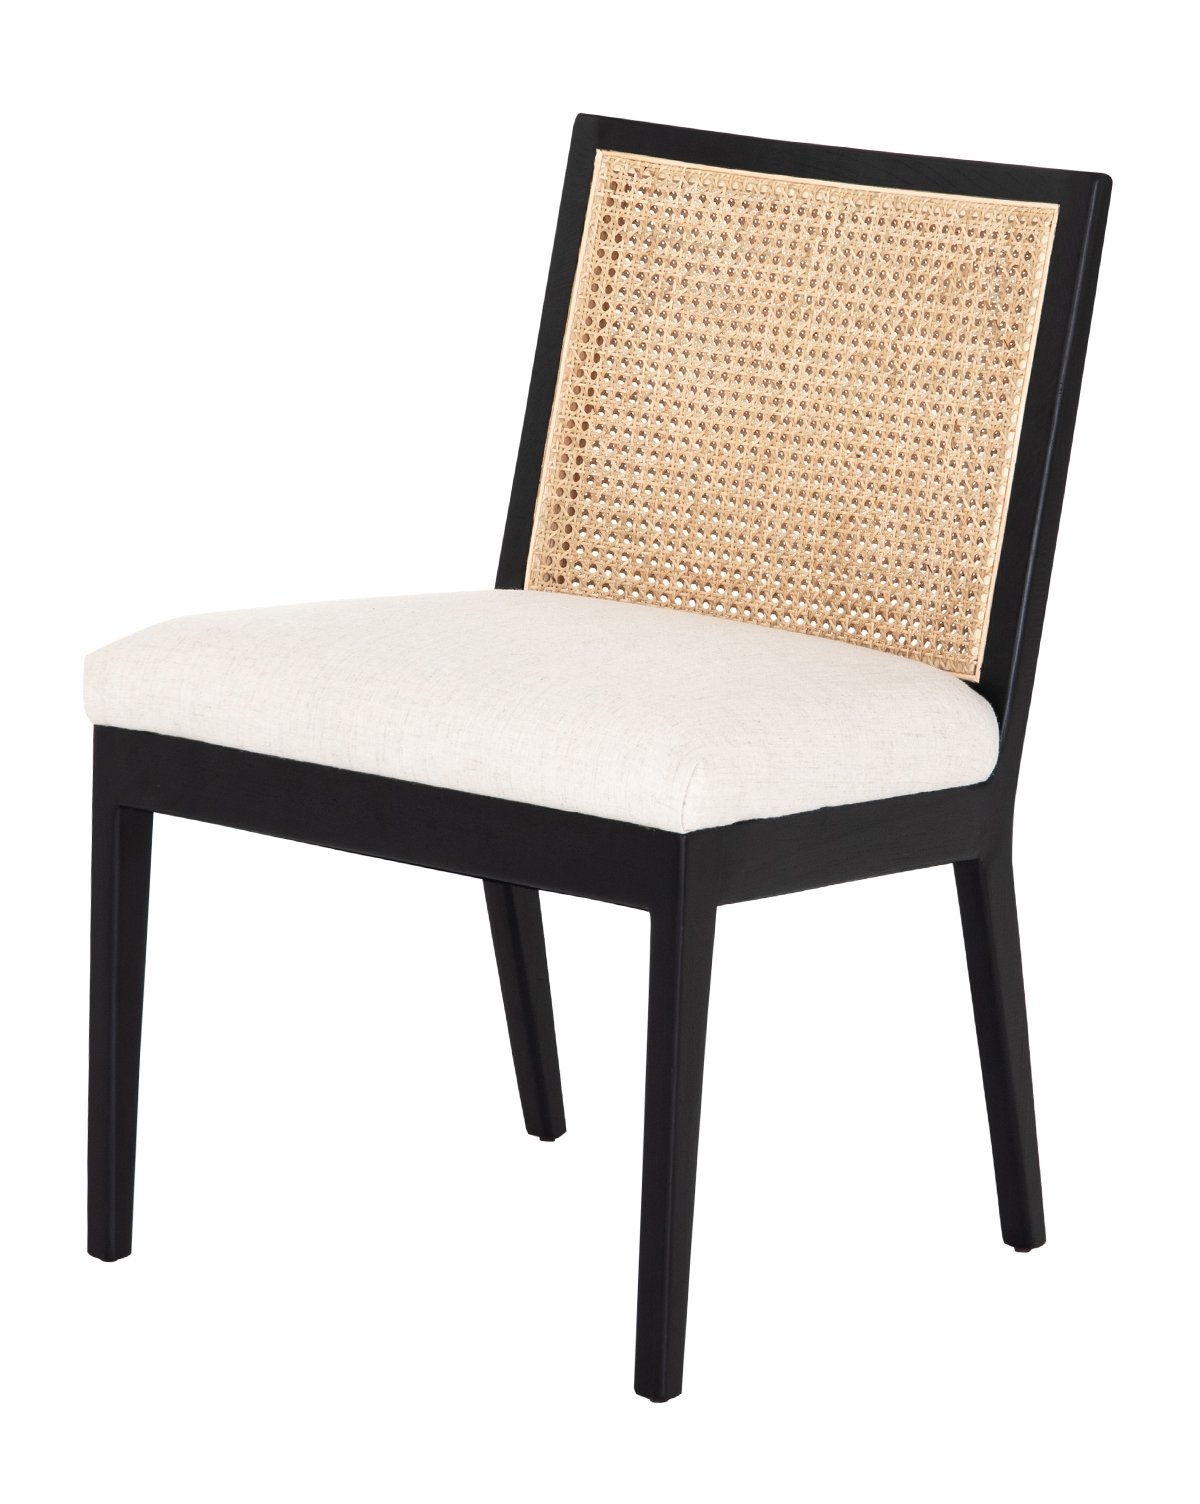 LANDON SIDE CHAIR (ships within 4-6 weeks) - Image 2